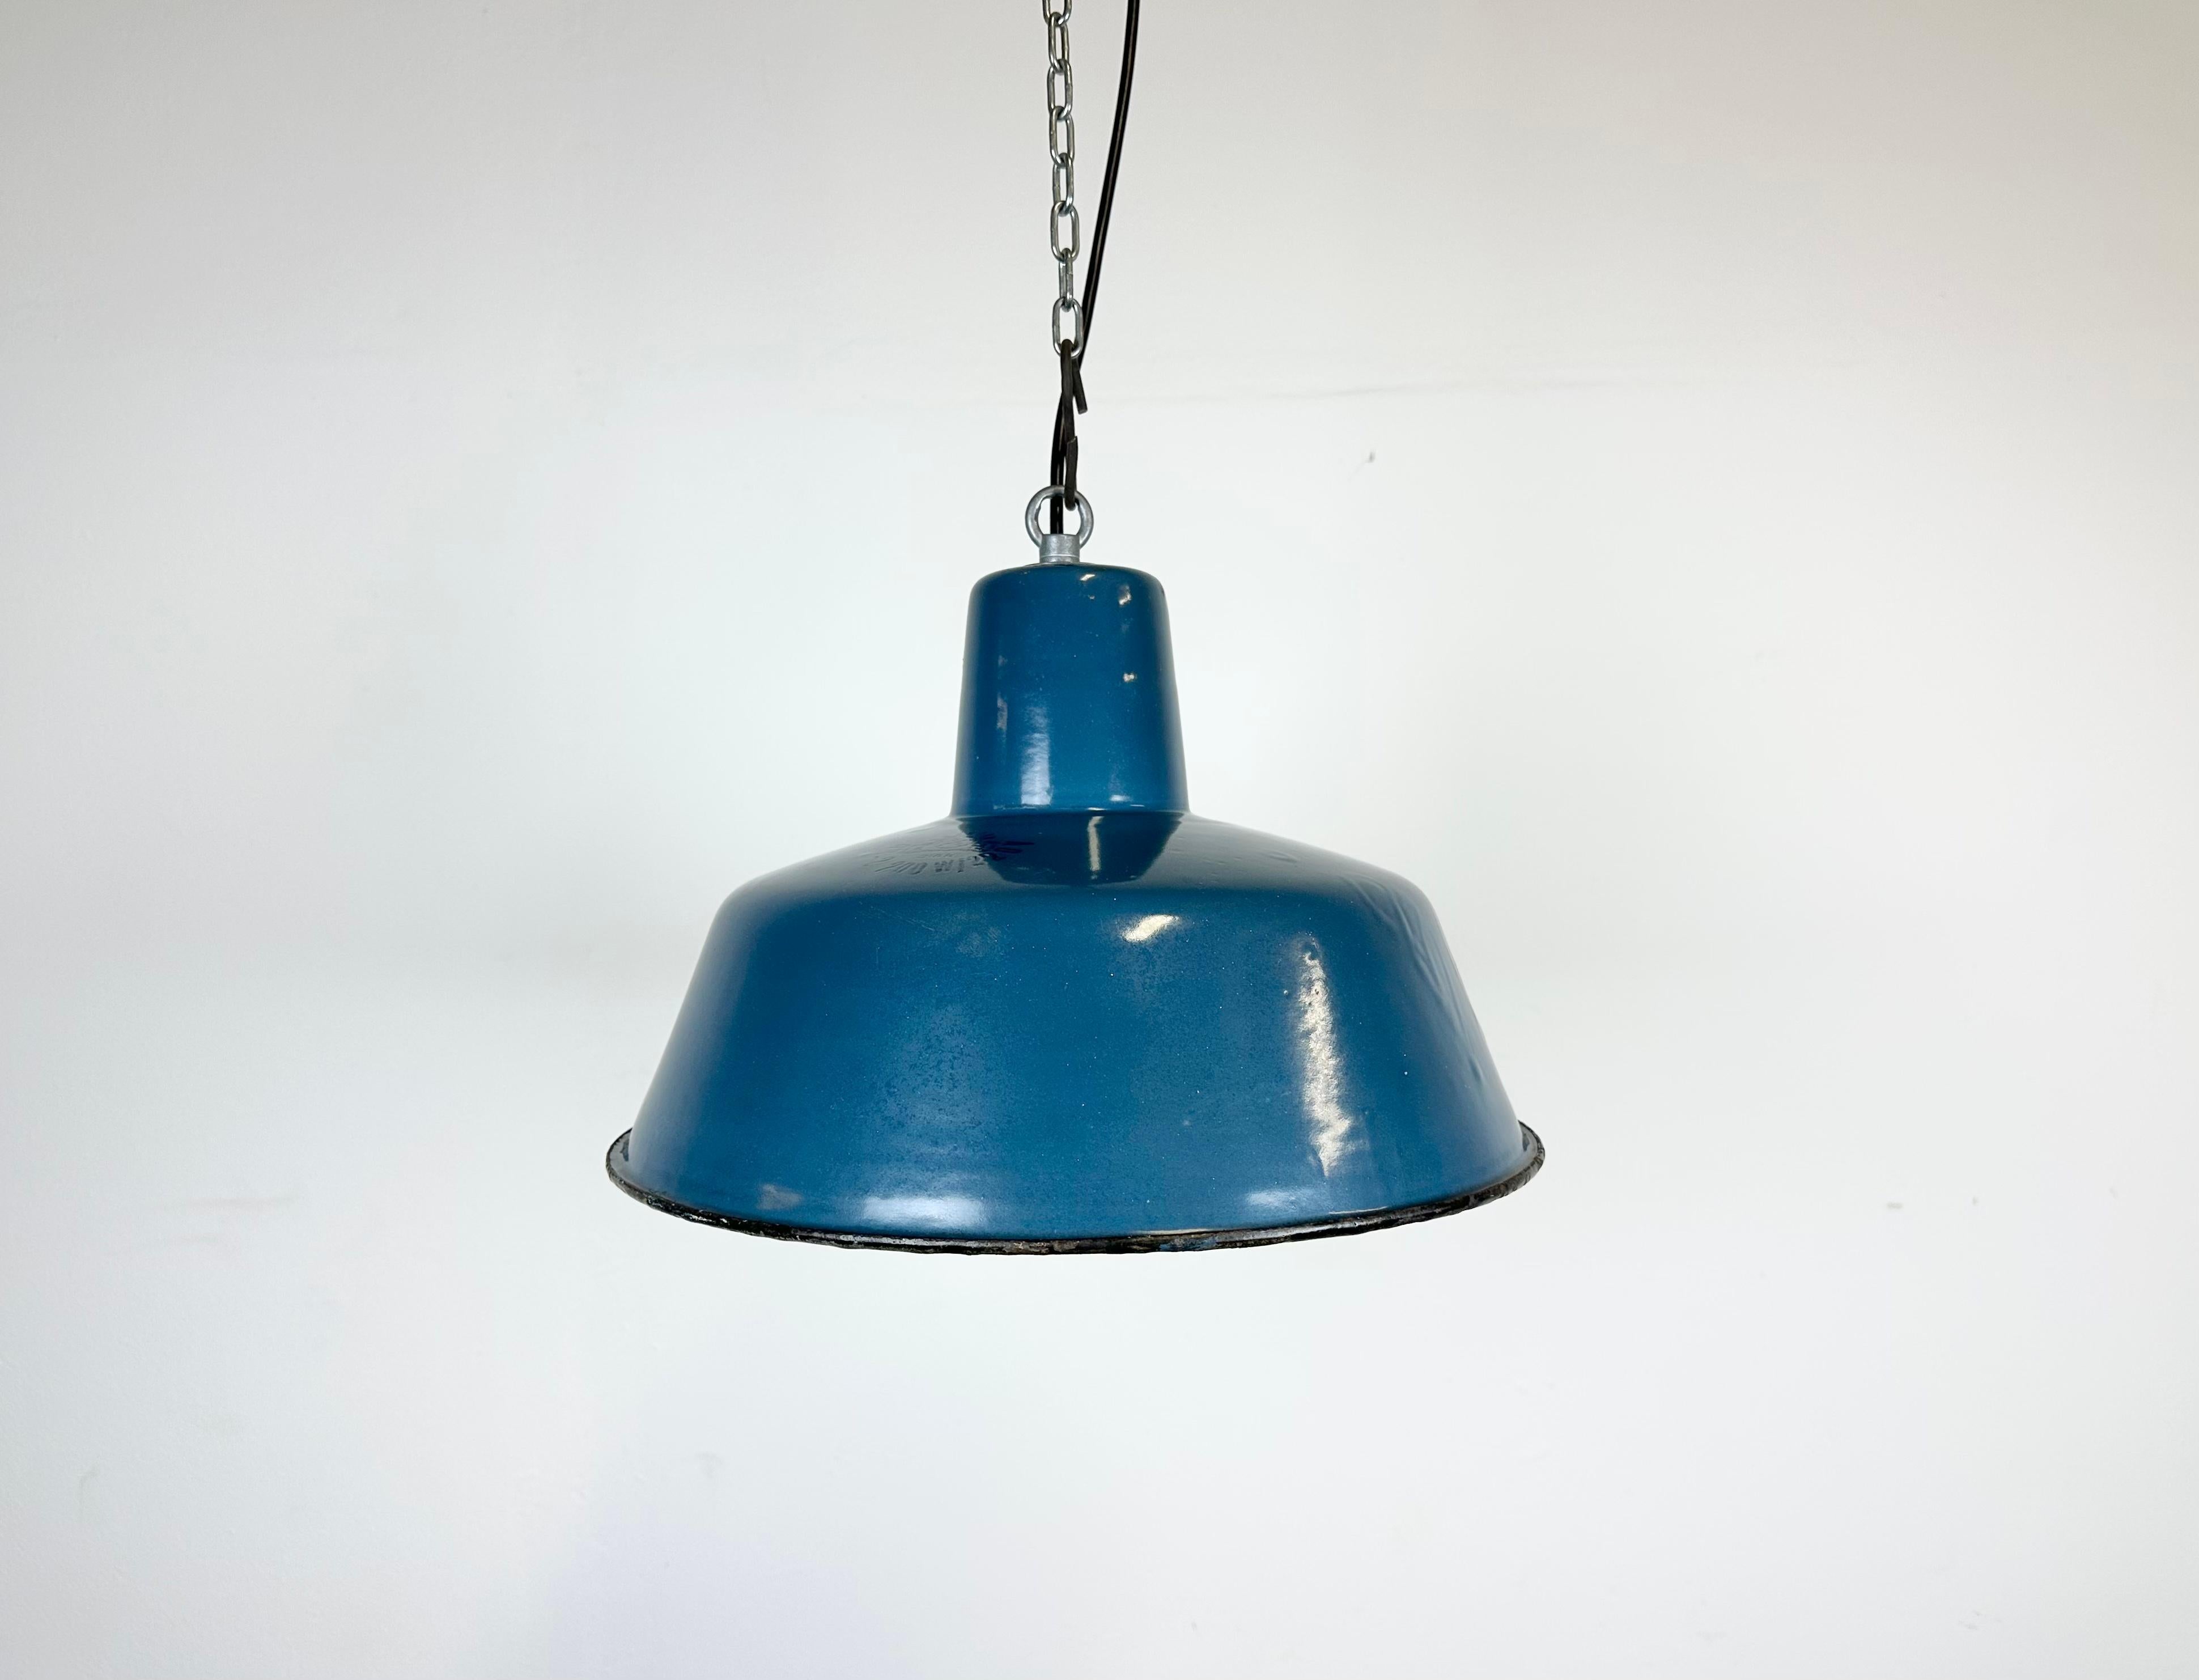 Industrial blue enamel pendant light made in Poland during the 1960s. White enamel inside the shade. Iron top. The porcelain socket requires E 27/ E 26 light bulbs. New wire. Fully functional. The weight of the lamp is 1,2 kg.